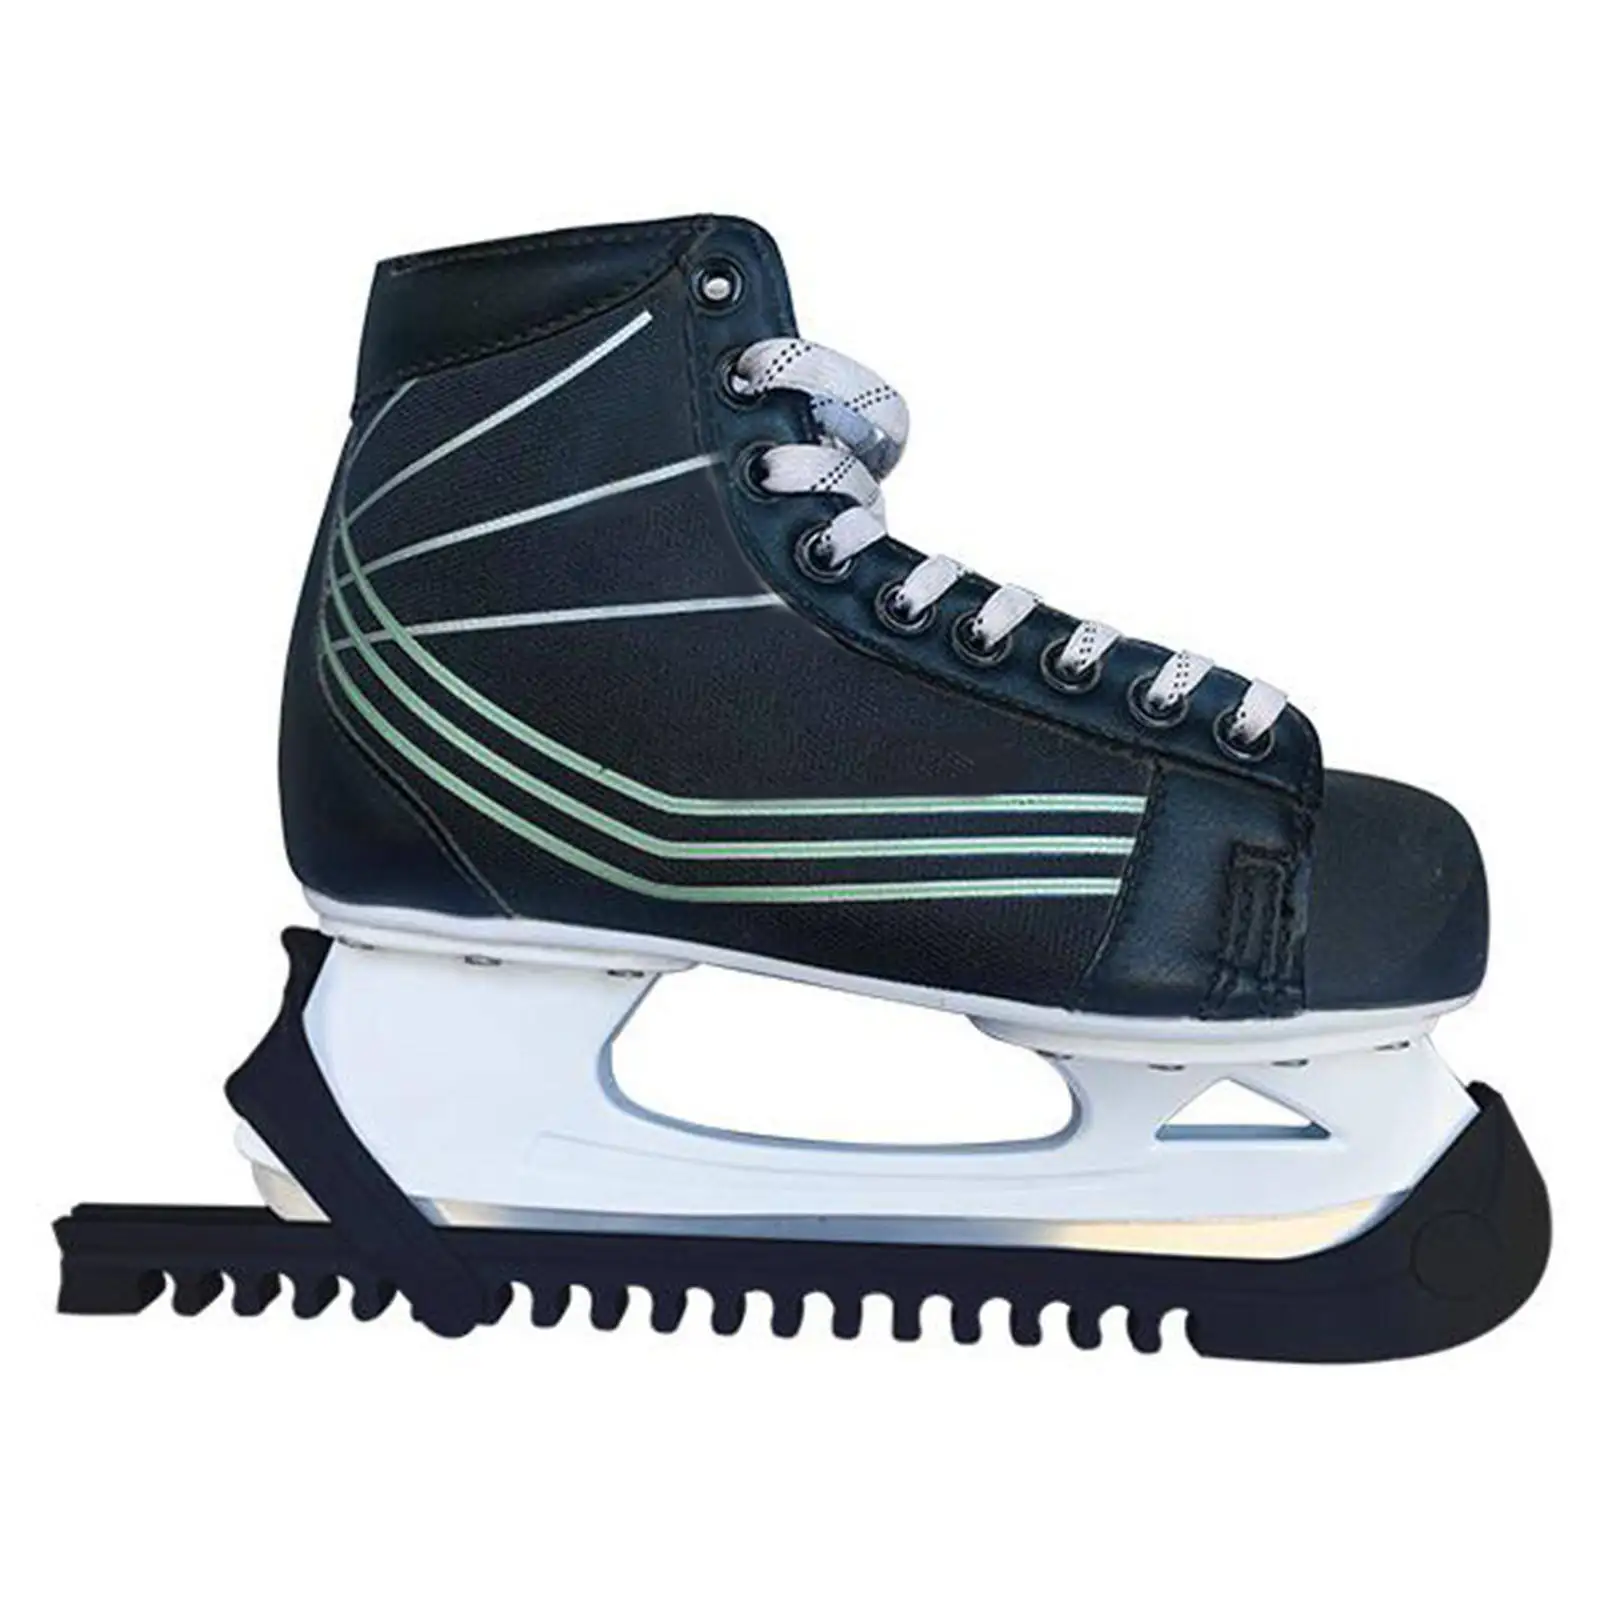 Sidelines Ice Hockey Skate Blade Guard Cover One Size Various Colours 